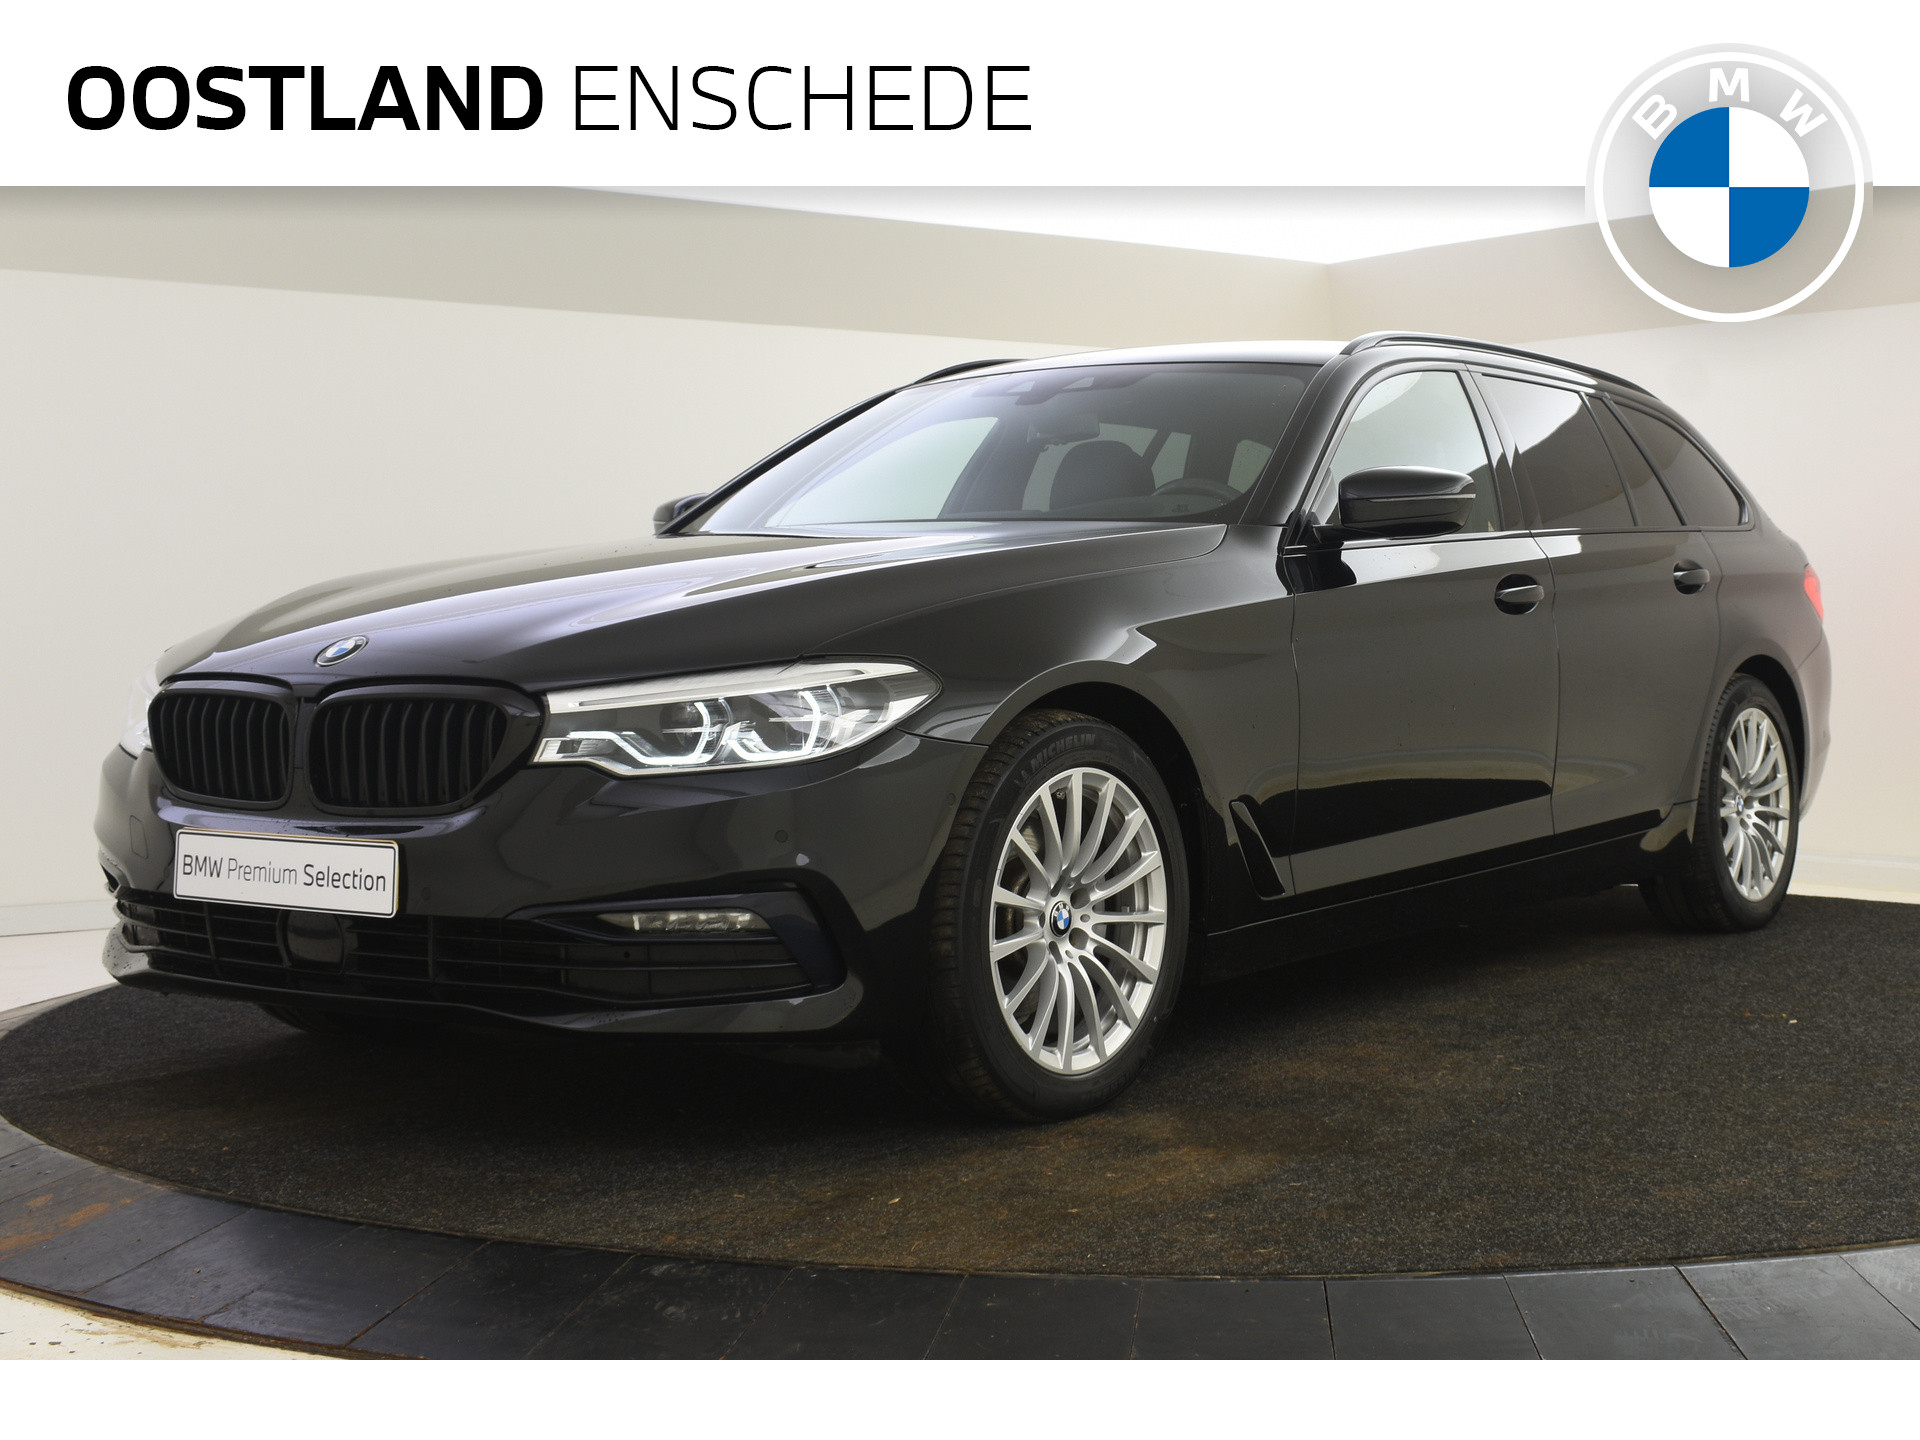 BMW 5 Serie Touring 520i High Executive Sport Line Shadow Line / Adaptieve LED / Active Cruise Control / Stoelventilatie / Head-Up / Parking Assistant / Navigatie Professional